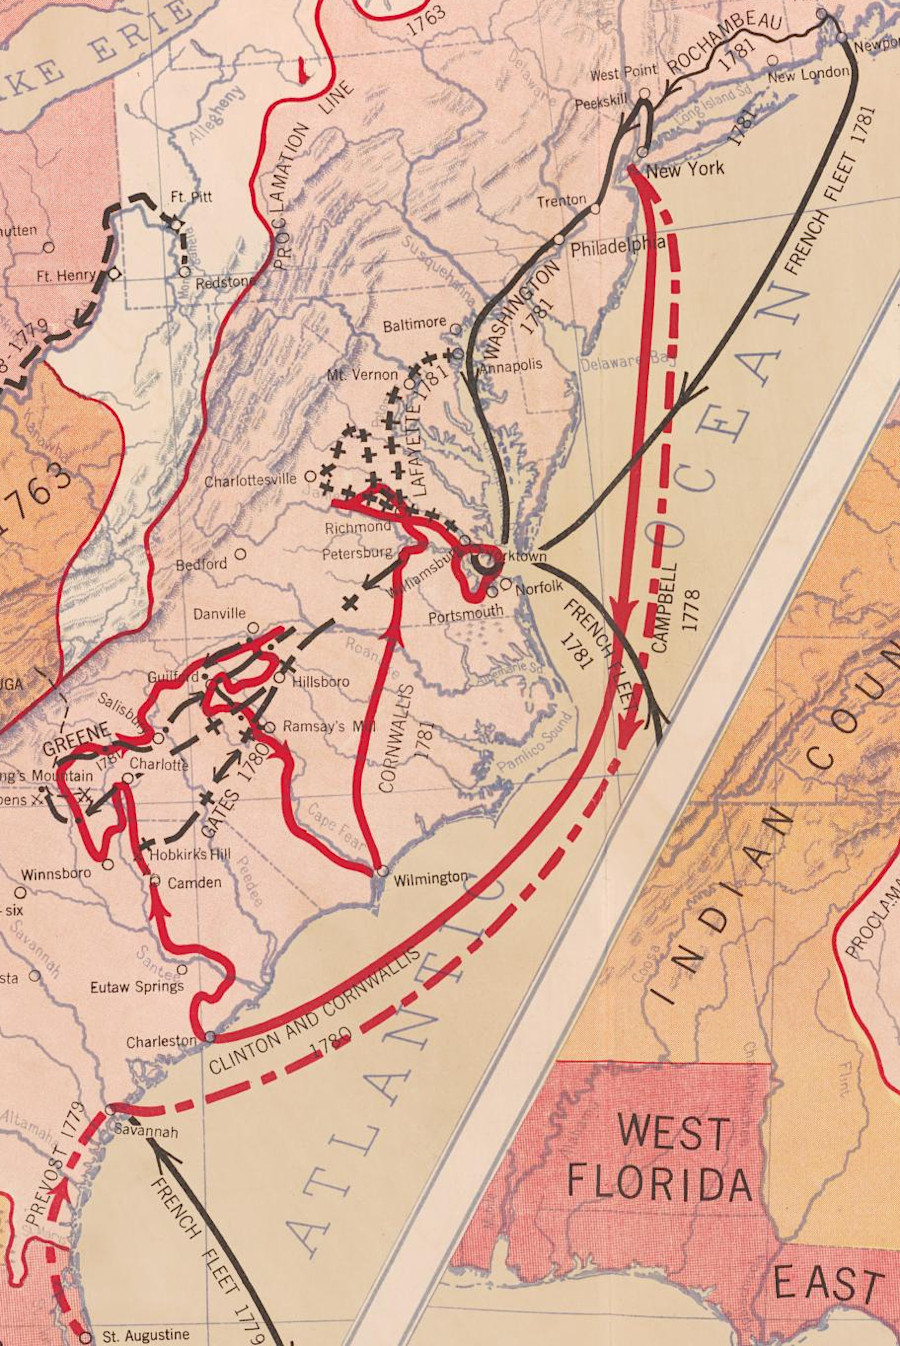 Cornwallis (red line) marched up from Charleston and across much of Virginia in 1781 before reaching Yorktown